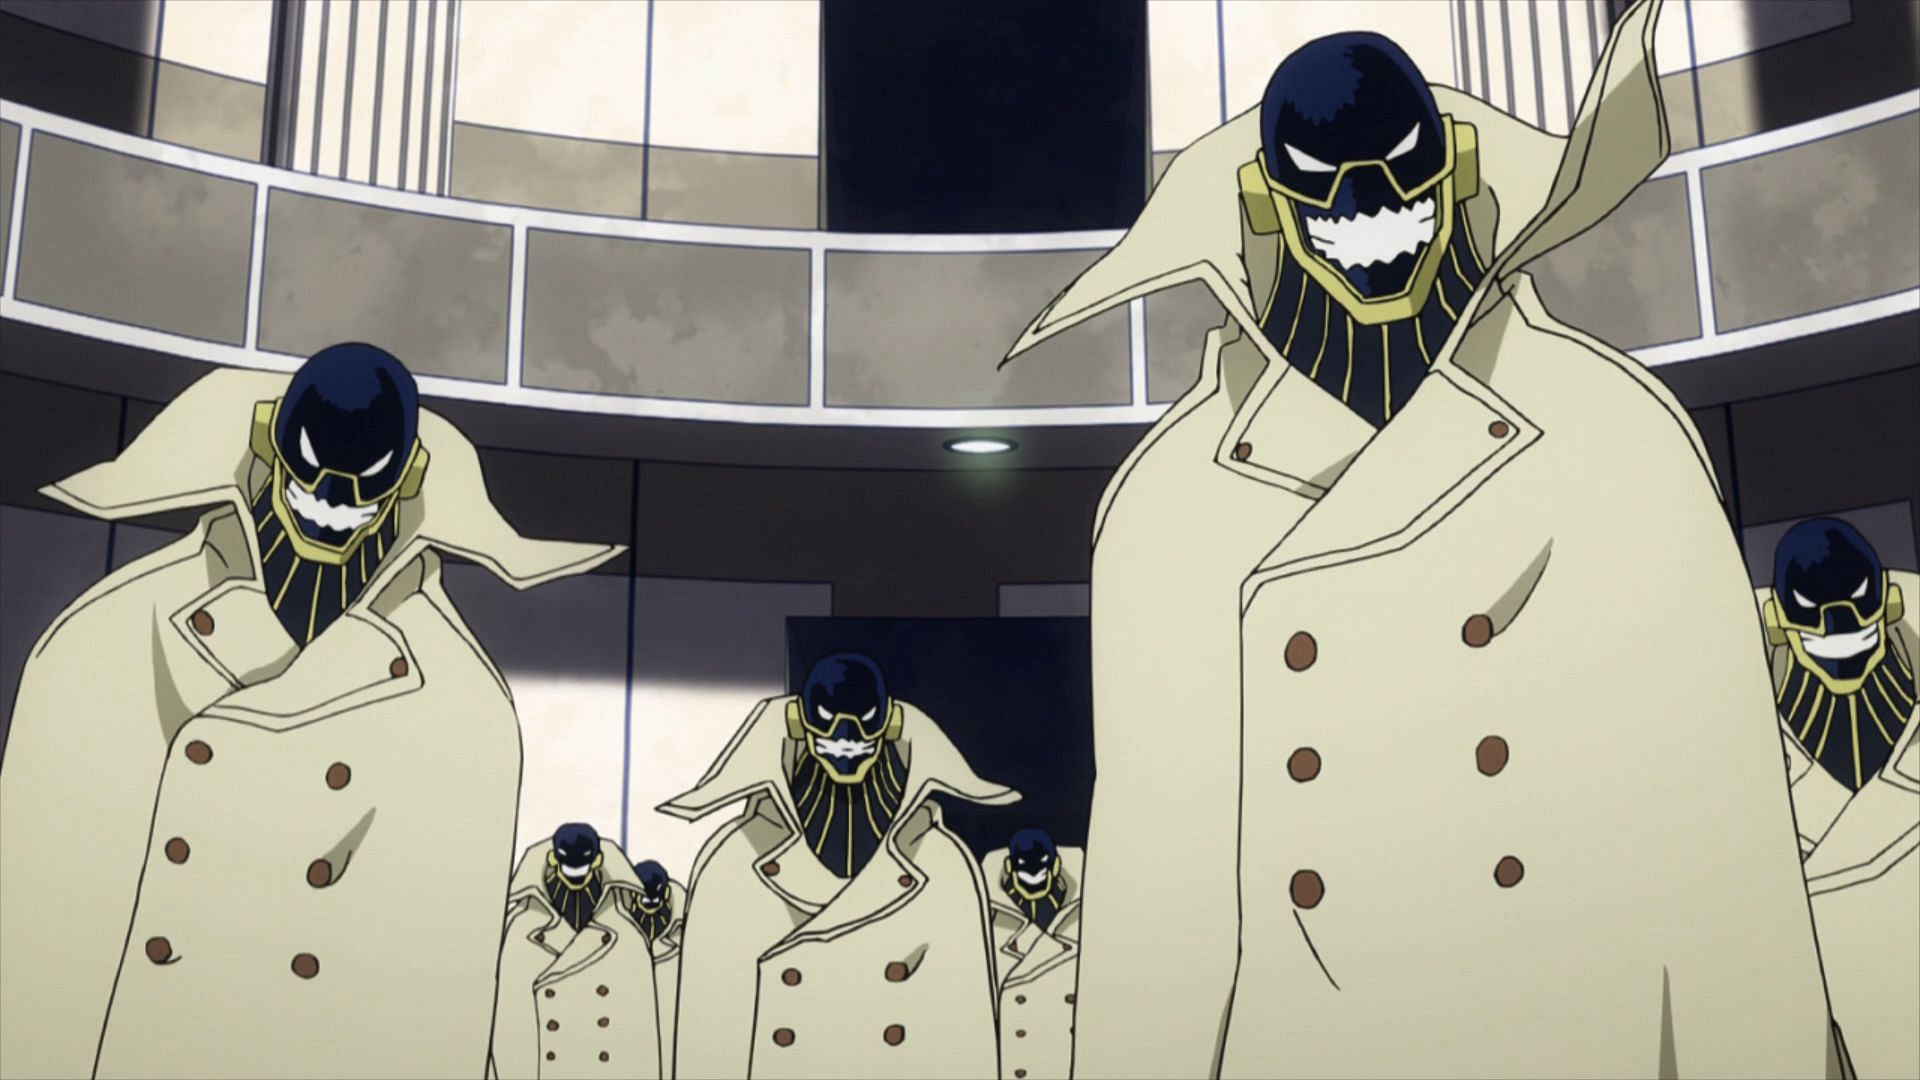 Ectoplasm and his clones which were created using the Quirk Clone. (Image via Studio Bones)